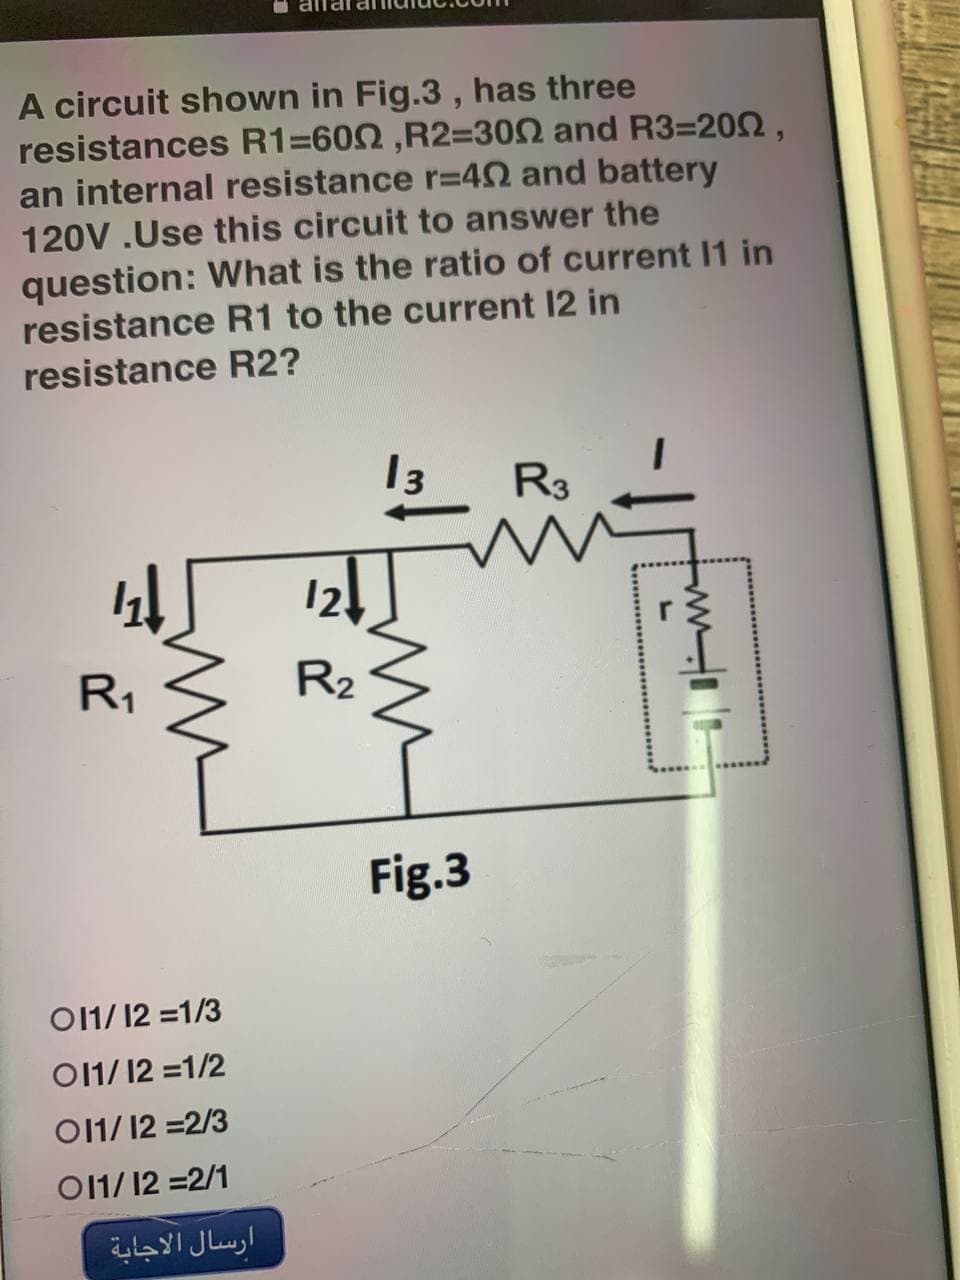 A circuit shown in Fig.3, has three
resistances R1=600, R2=300 and R3=200,
an internal resistance r=402 and battery
120V.Use this circuit to answer the
question: What is the ratio of current 11 in
resistance R1 to the current 12 in
resistance R2?
13 R3
41
R₁
011/12 =1/3
011/12 = 1/2
011/12 = 2/3
011/12 = 2/1
ارسال الاجابة
12↓
R₂
Fig.3
www.